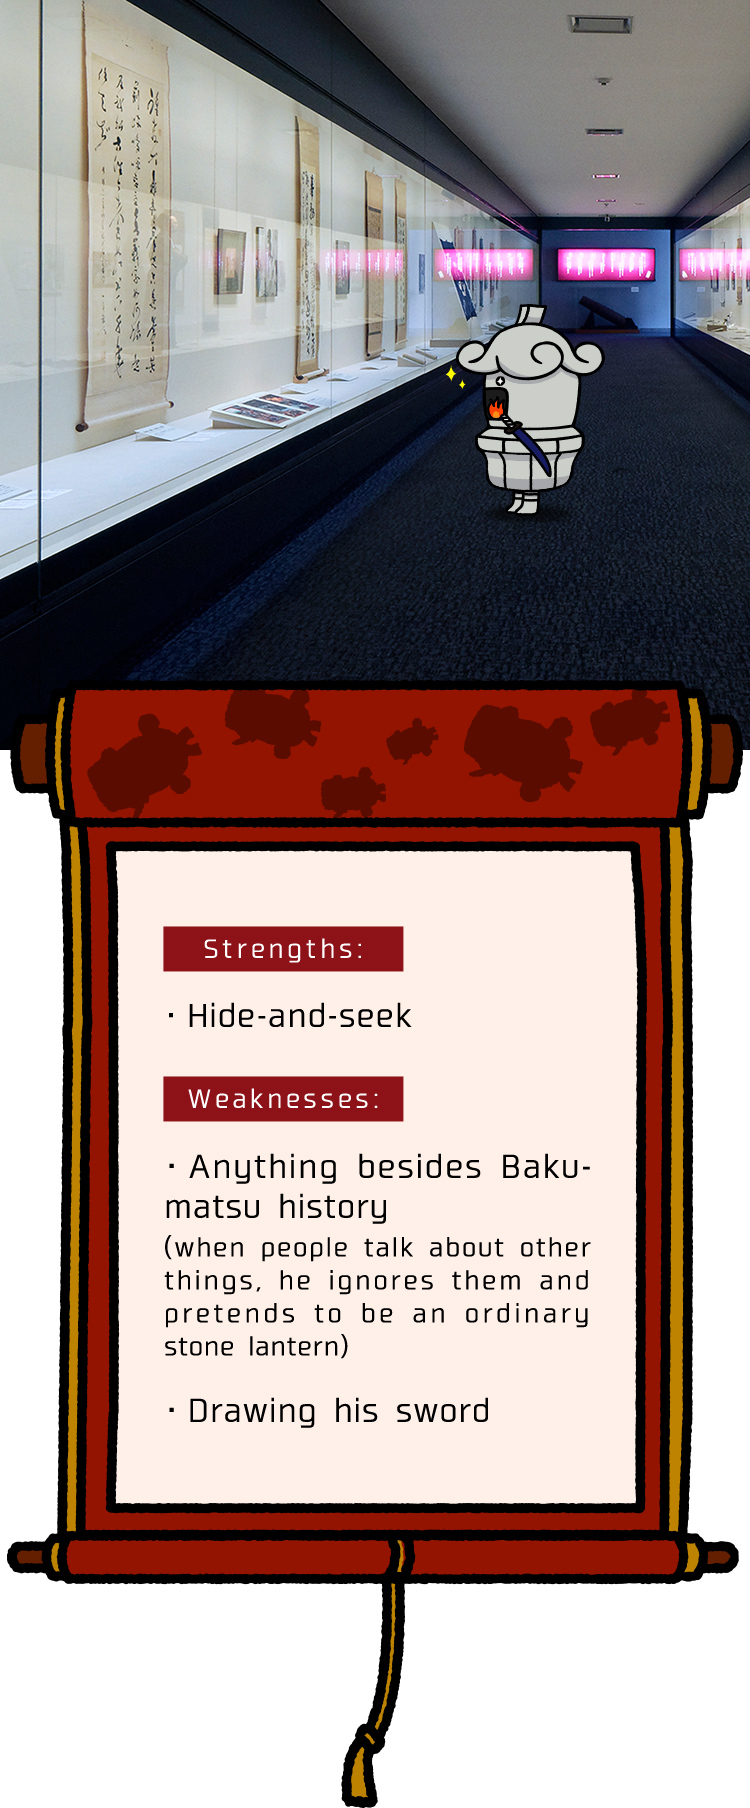 Strengths is Hide-and-seek. Weaknesses are anything besides Bakumatsu history (when people talk about other things, he ignores them and pretends to be an ordinary stone lantern) and drawing his sword.